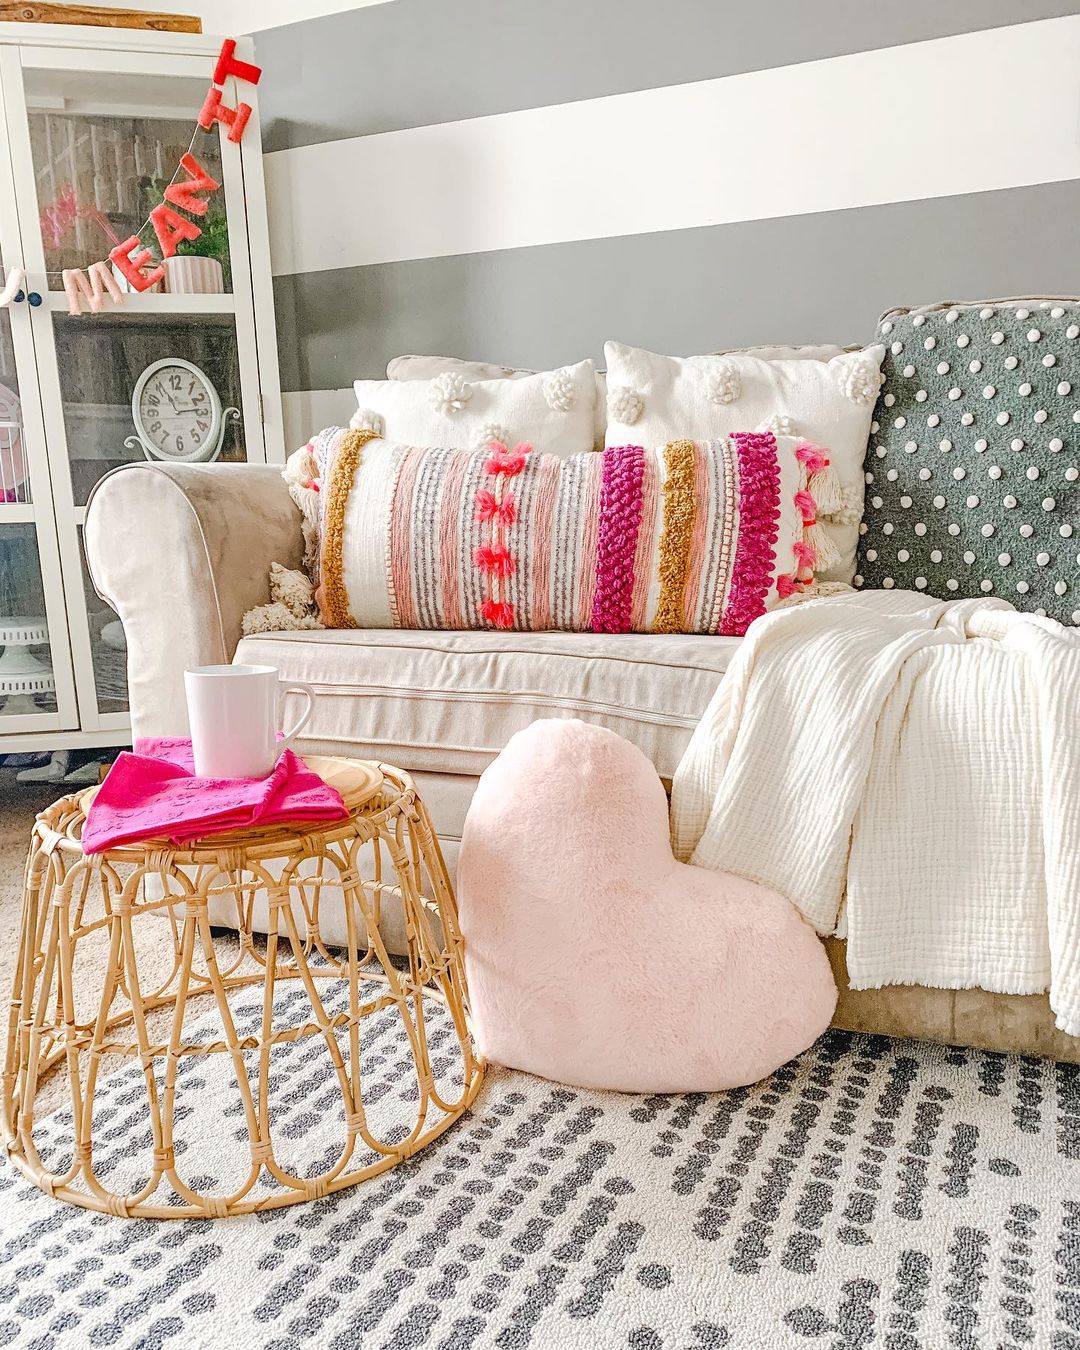 Geometric Arbor rug placed under a white couch. There are various pink and heart shaped pillows, a rattan ottoman and a garland hanging up behind the couch reading "be mine"